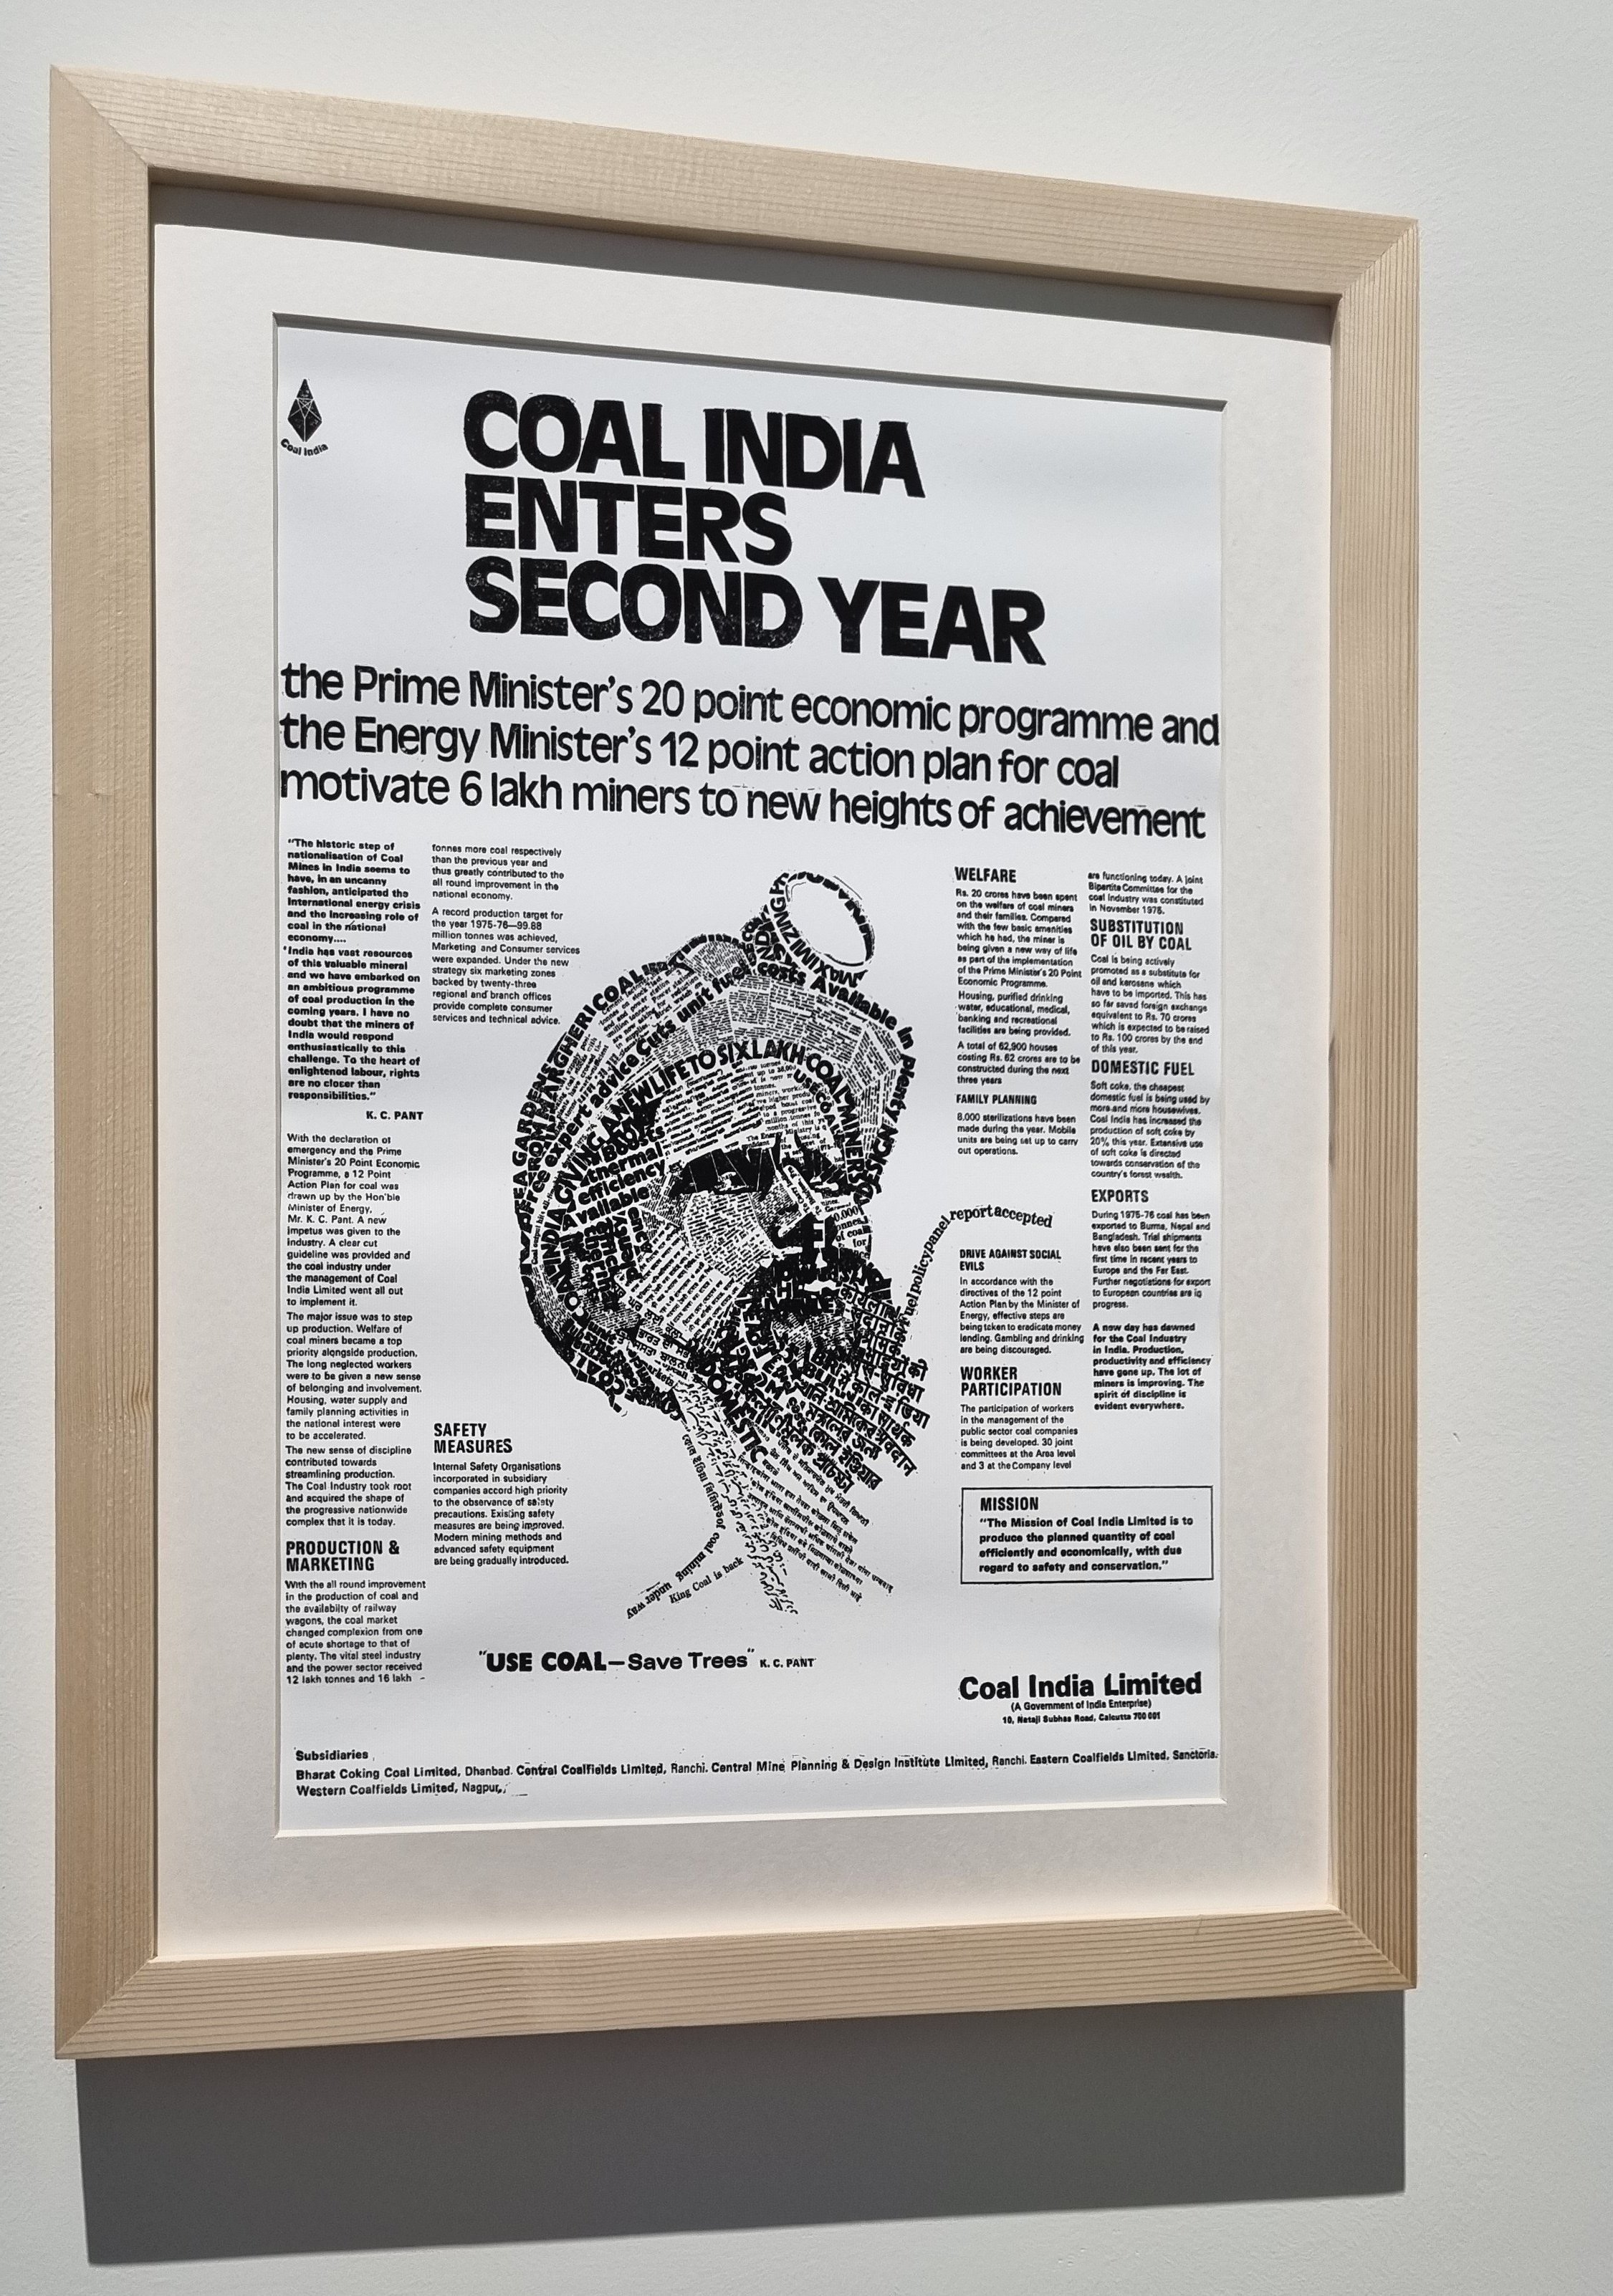 An advertisement of coal India from the 1970’s advocating the use of coal. Photo credits: Sindhu M